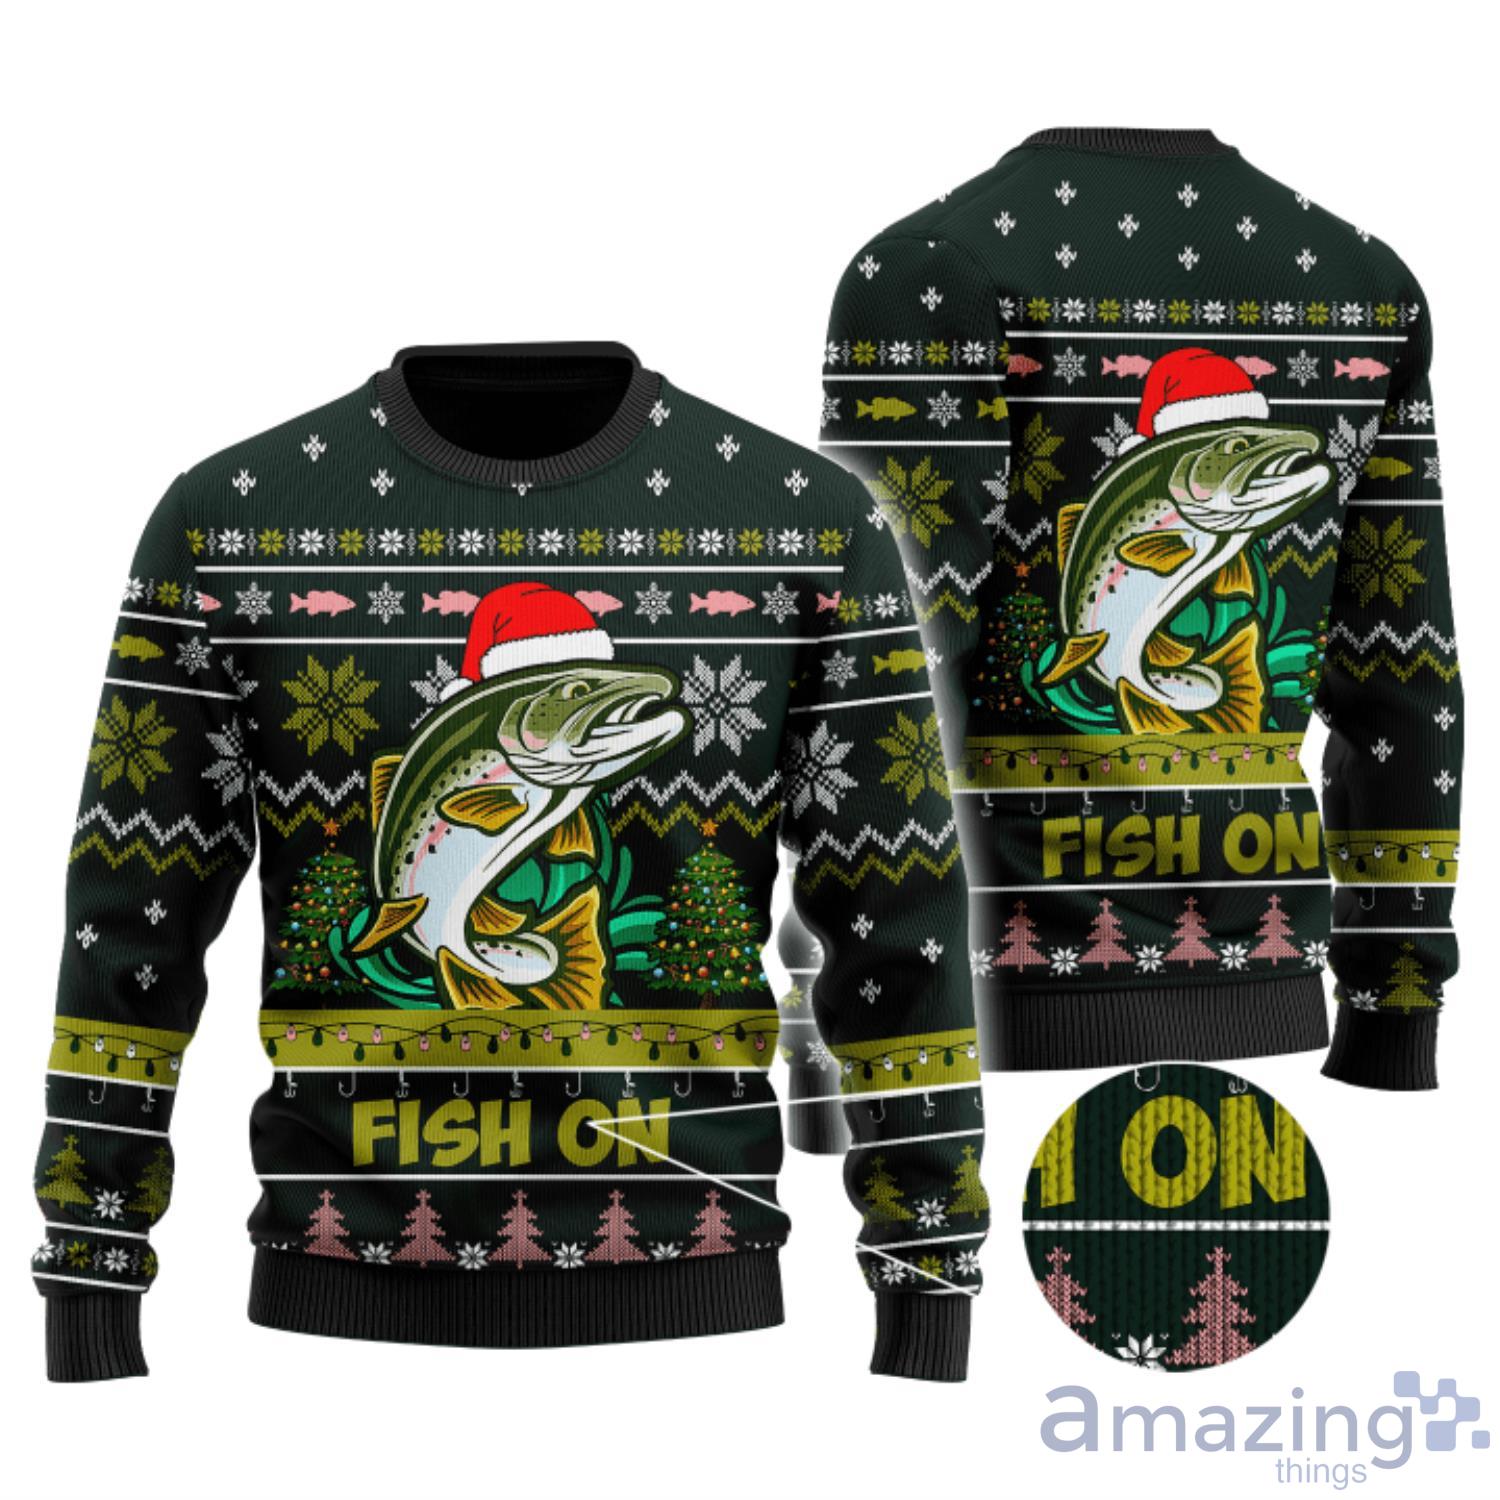 Trout Fishing Fish On Christmas Hat Ugly Christmas Sweater